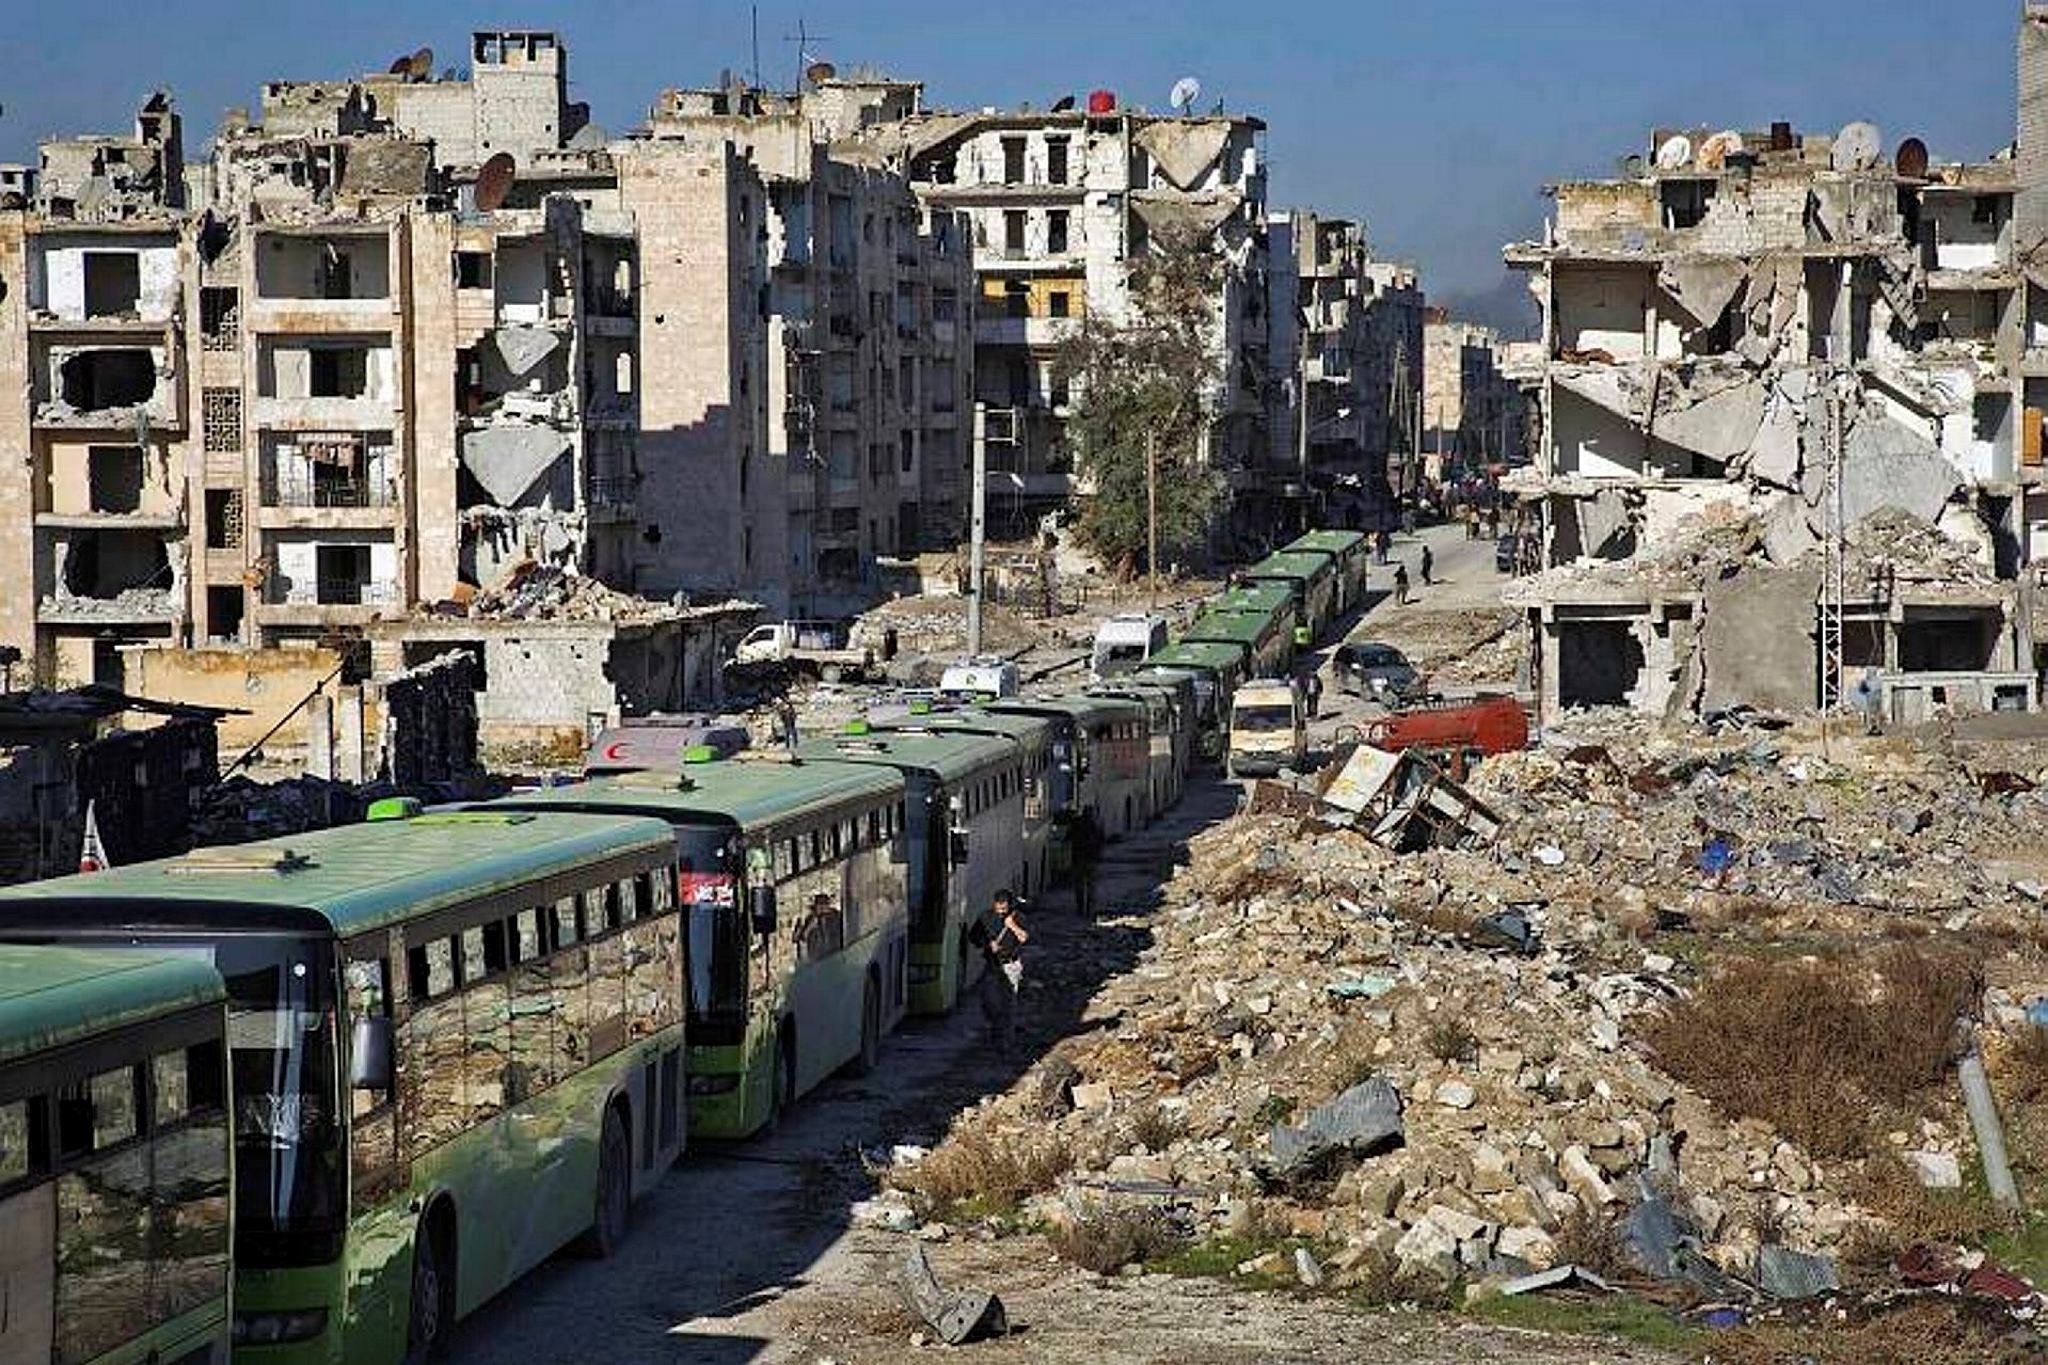 Buses are seen during an evacuation operation of opposition fighters and their families from opposition-held neighbourhoods in the embattled city of Aleppo, Dec. 15